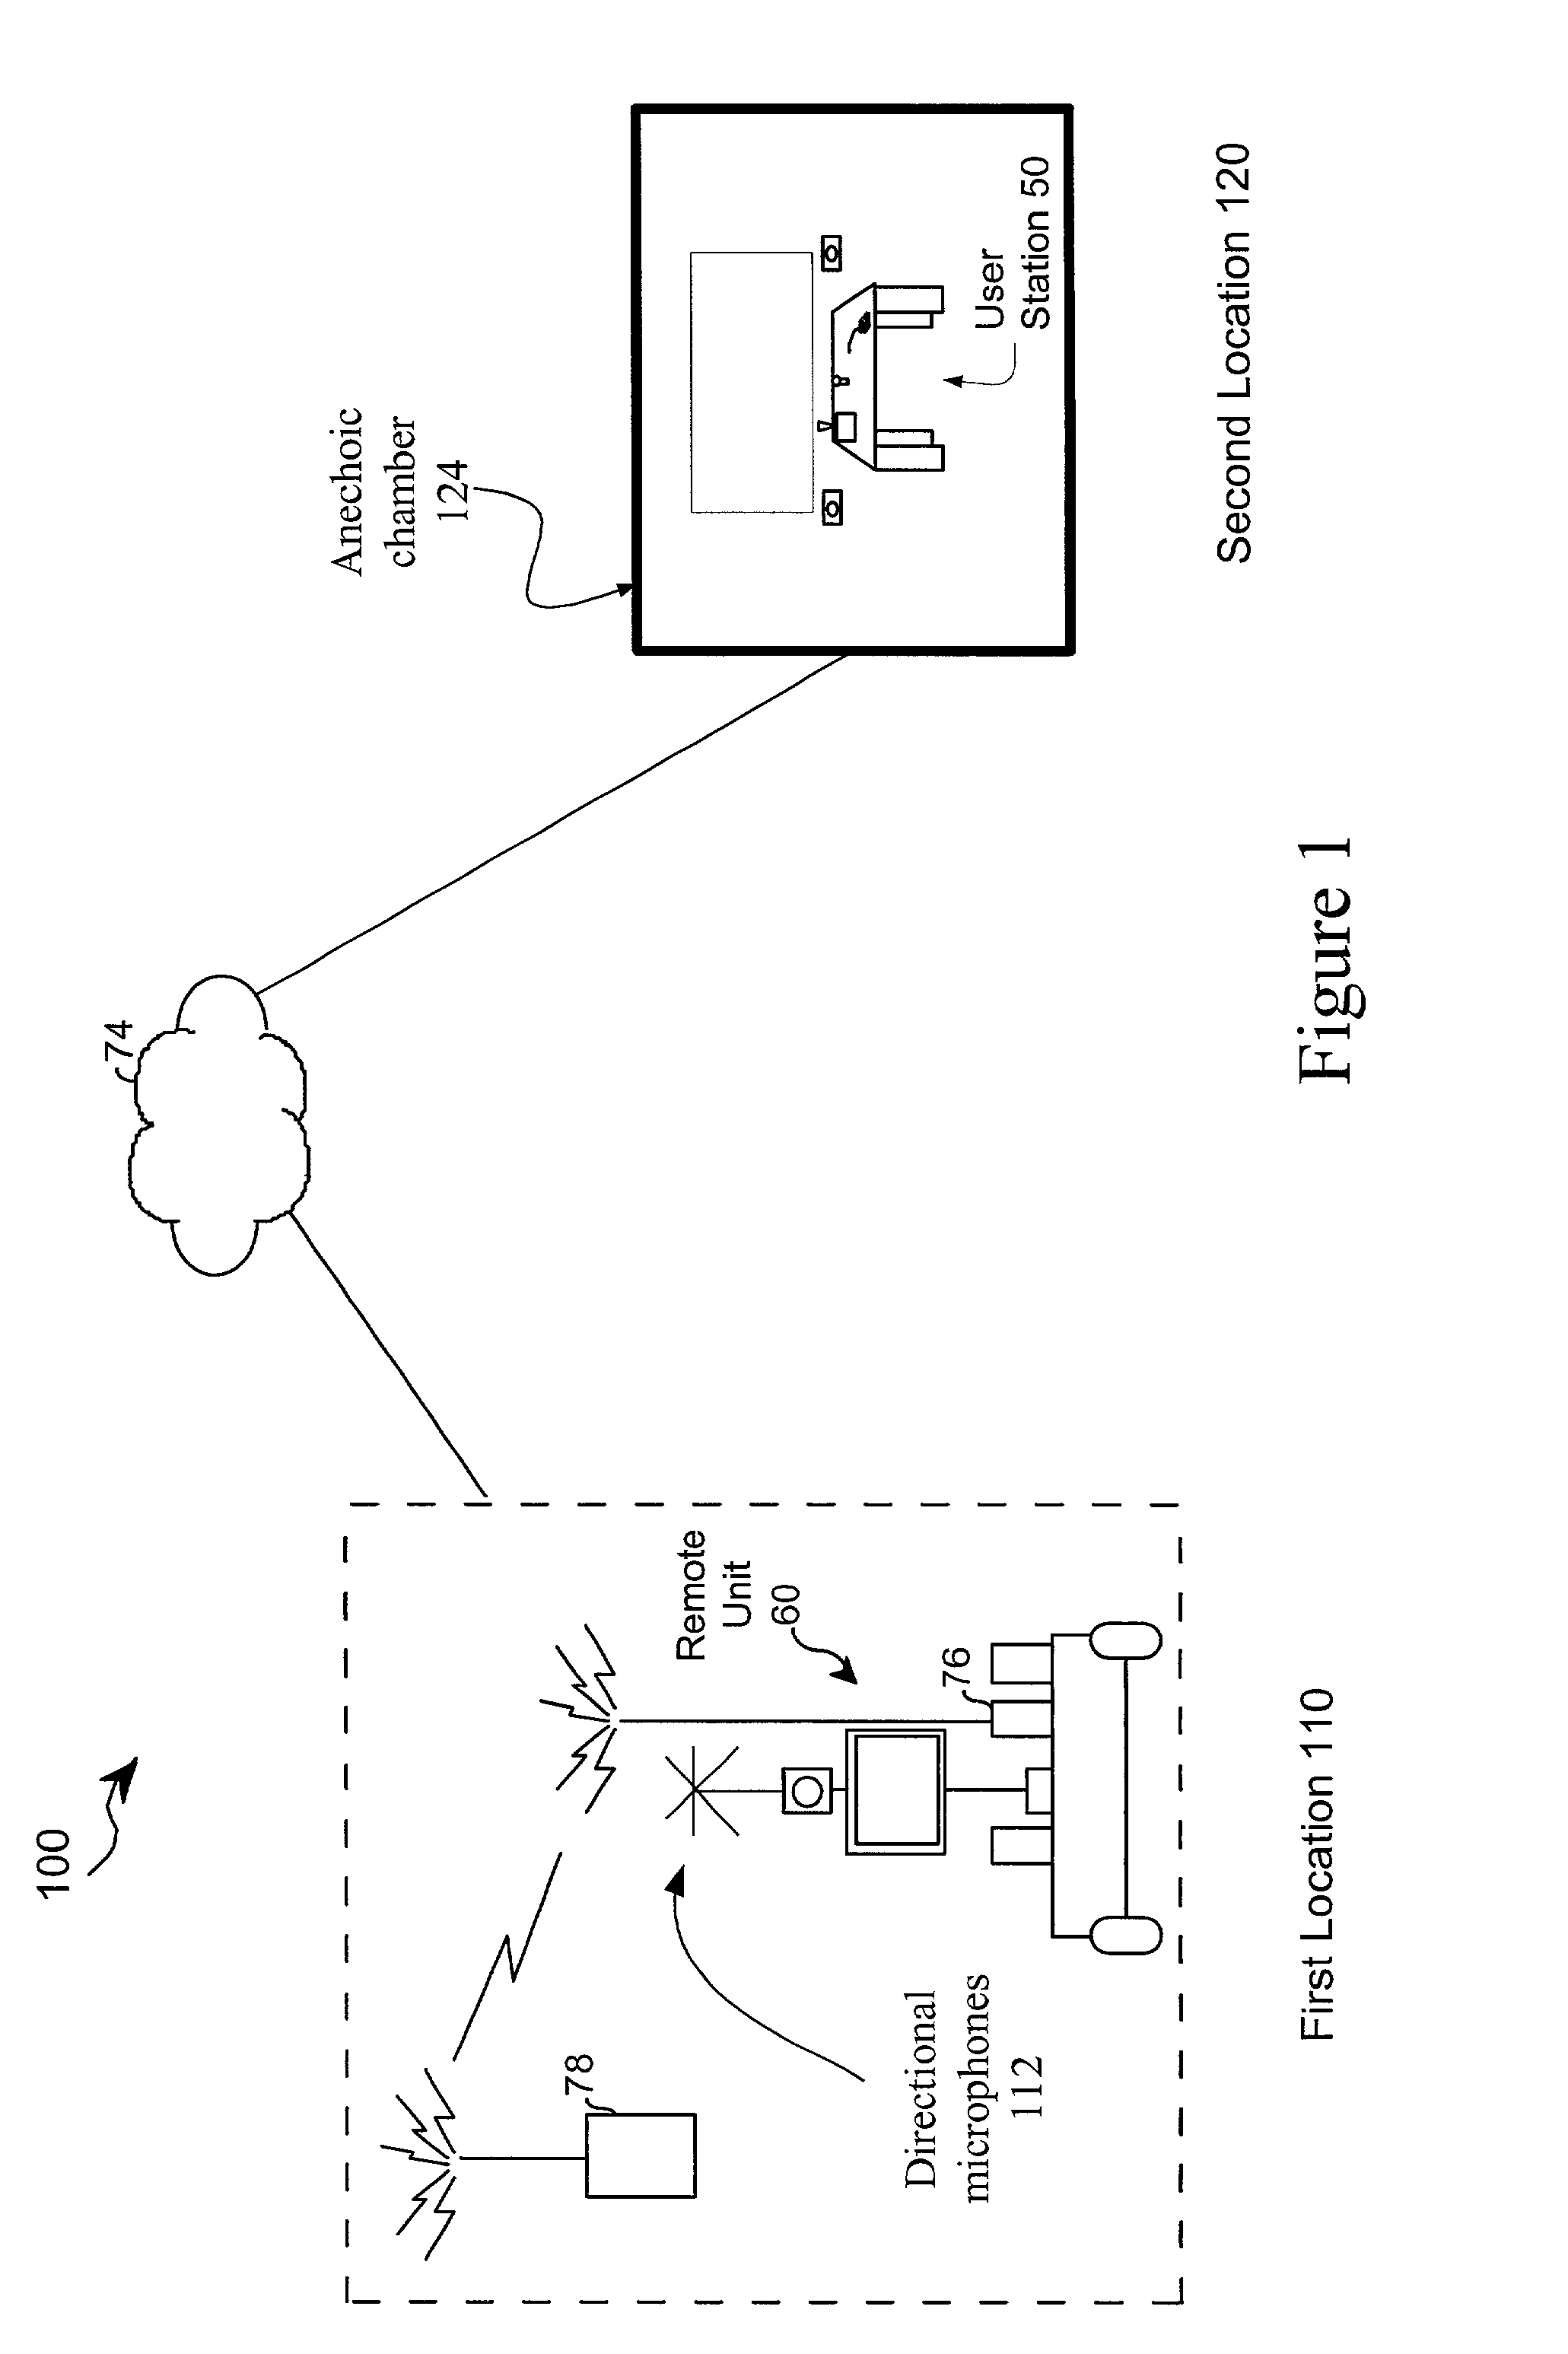 System and method for audio telepresence